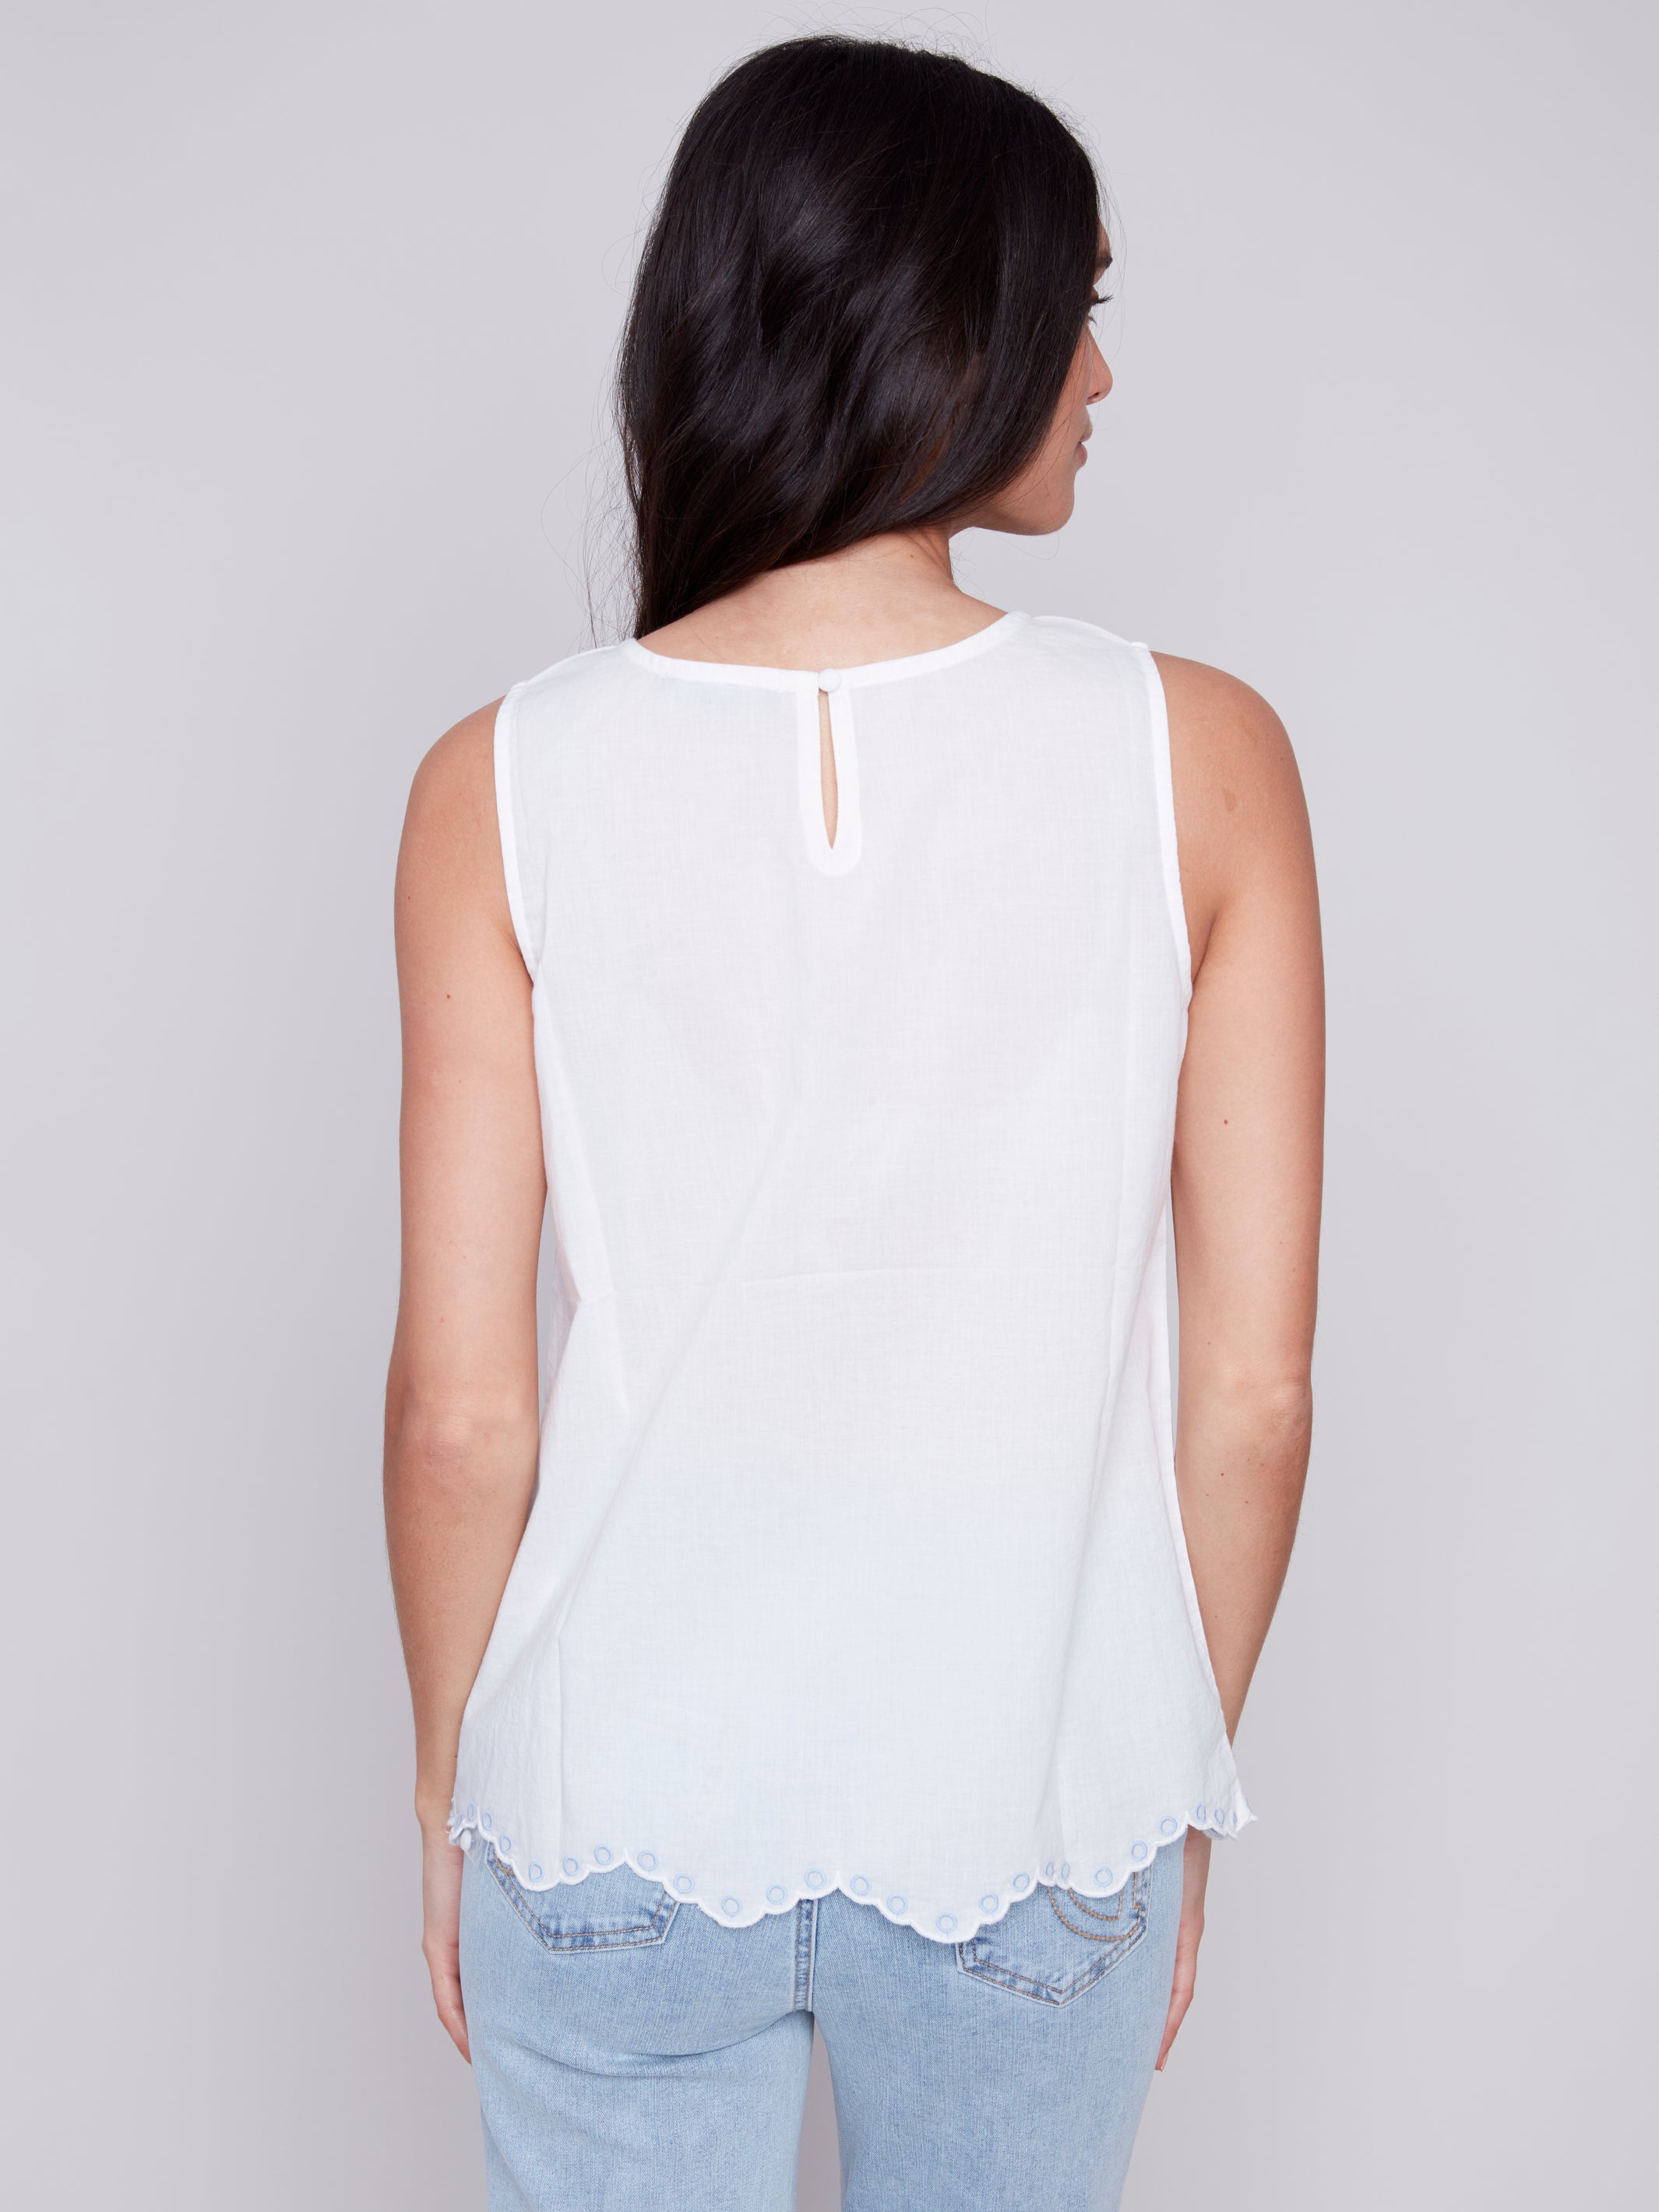 Embroidered Sleeveless Top C4510/868B